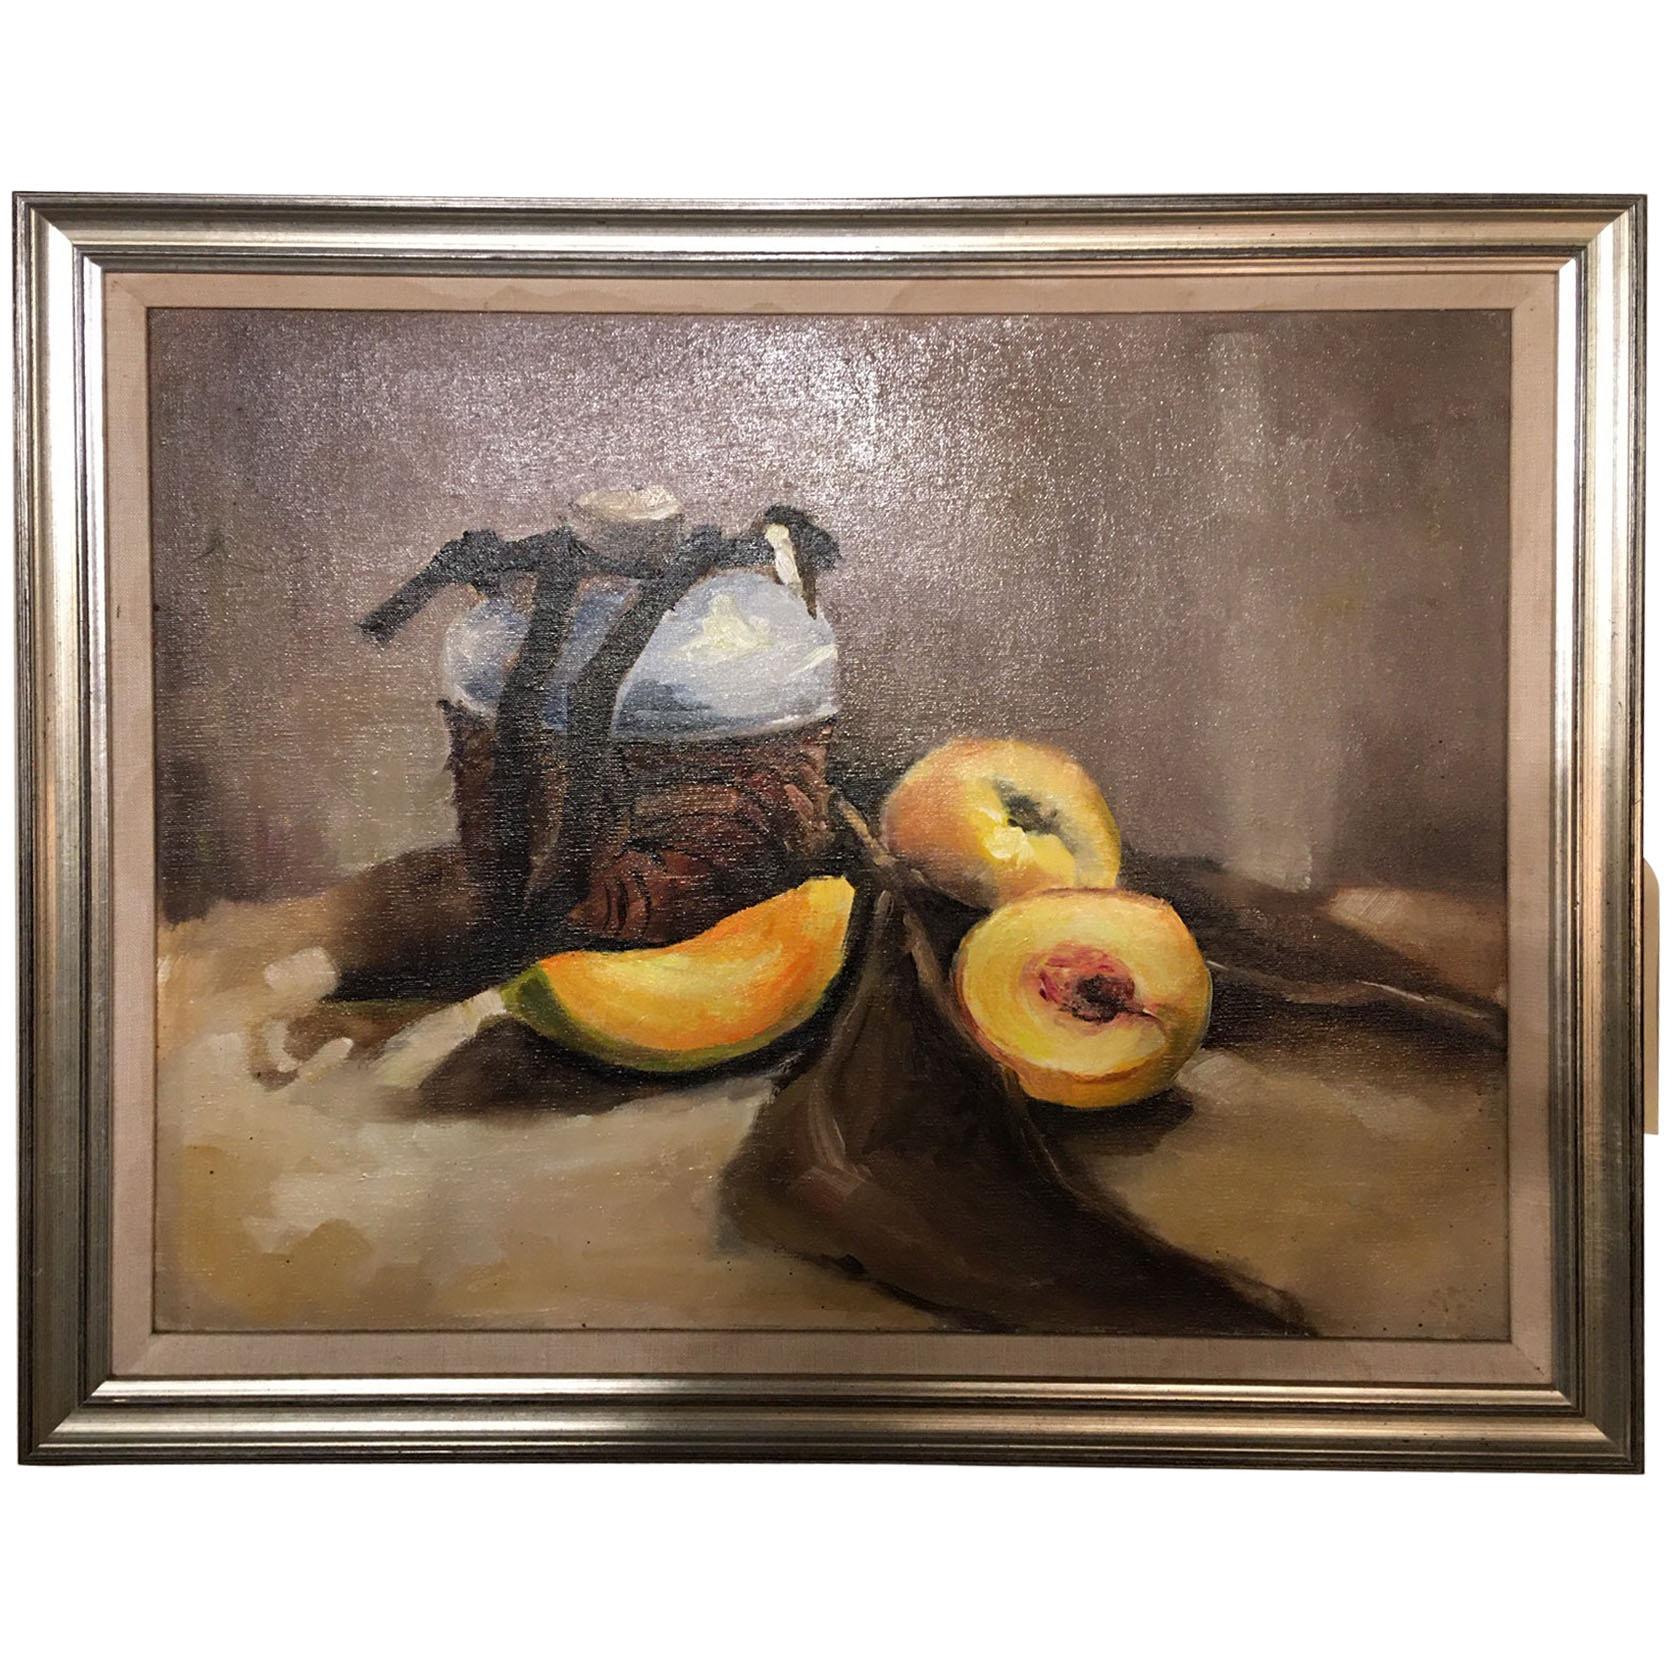 Framed Oil on Canvas "Still Life" Peaches and Pot, Unsigned, Early 20th Century